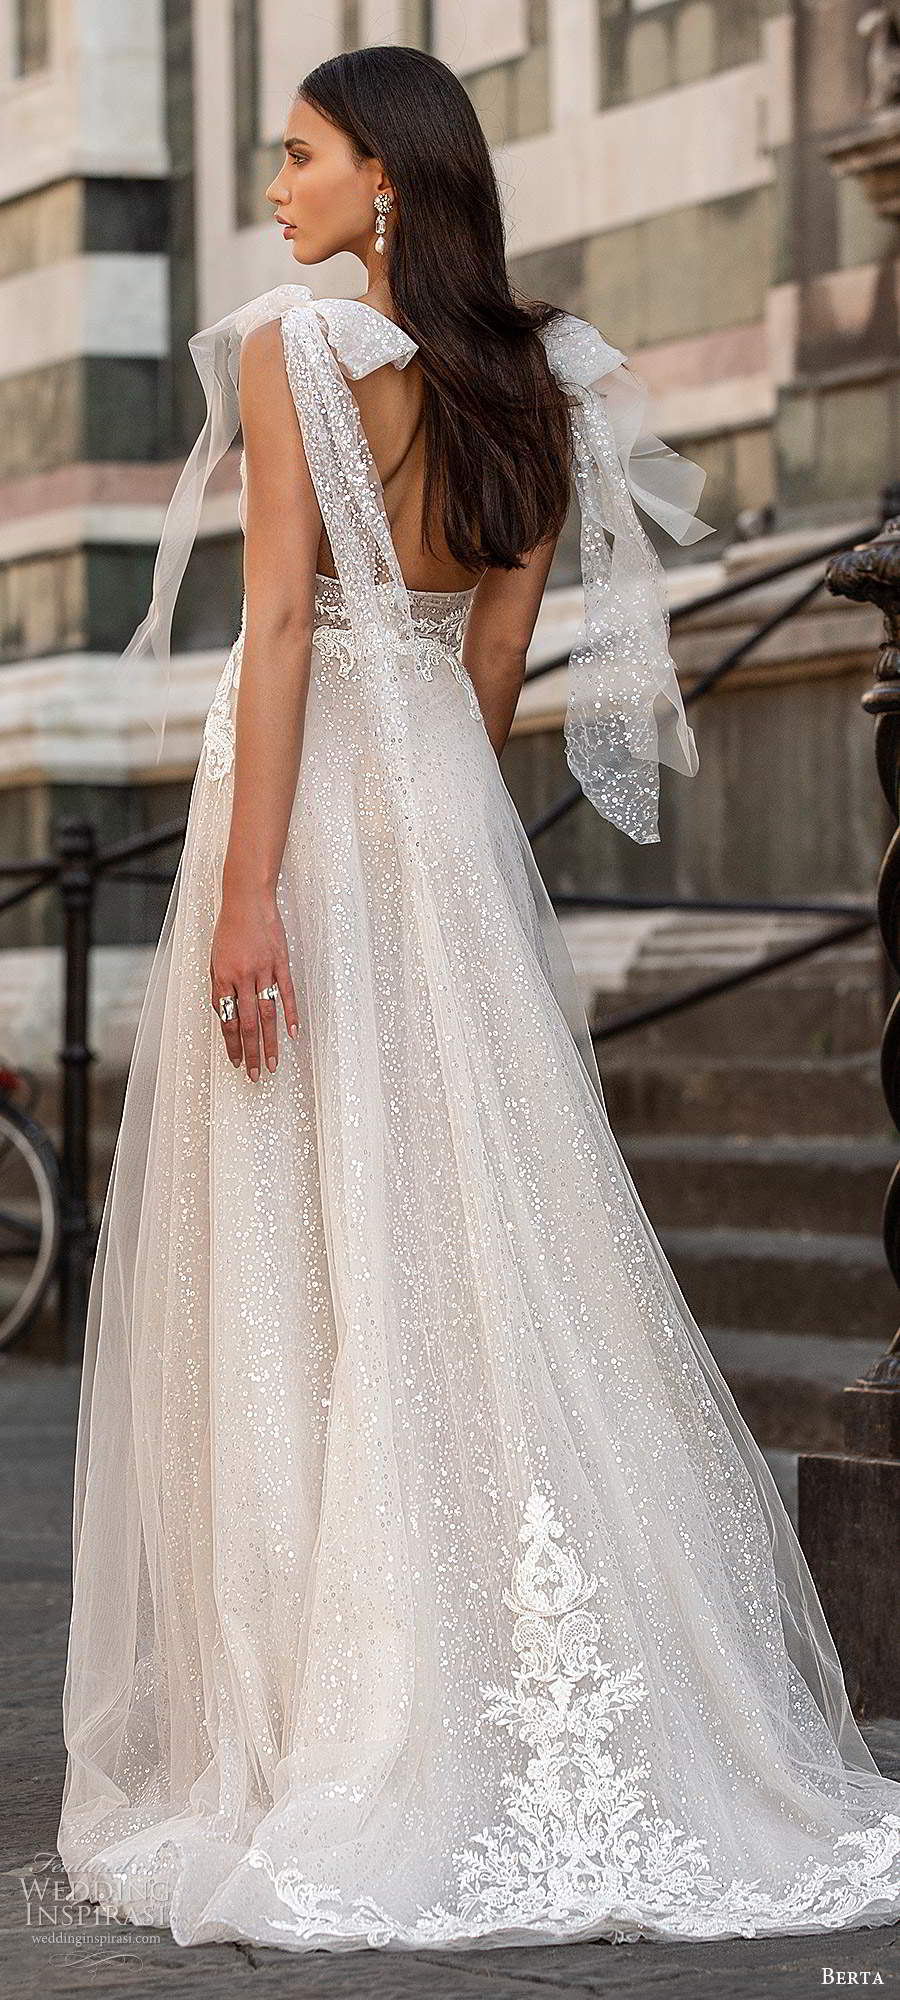 berta fall 2020 muse bridal sleeveless thin straps bow plunging v neckline embellished bodice a line ball gown glitzy wedding dress low back chapel train (4) bv